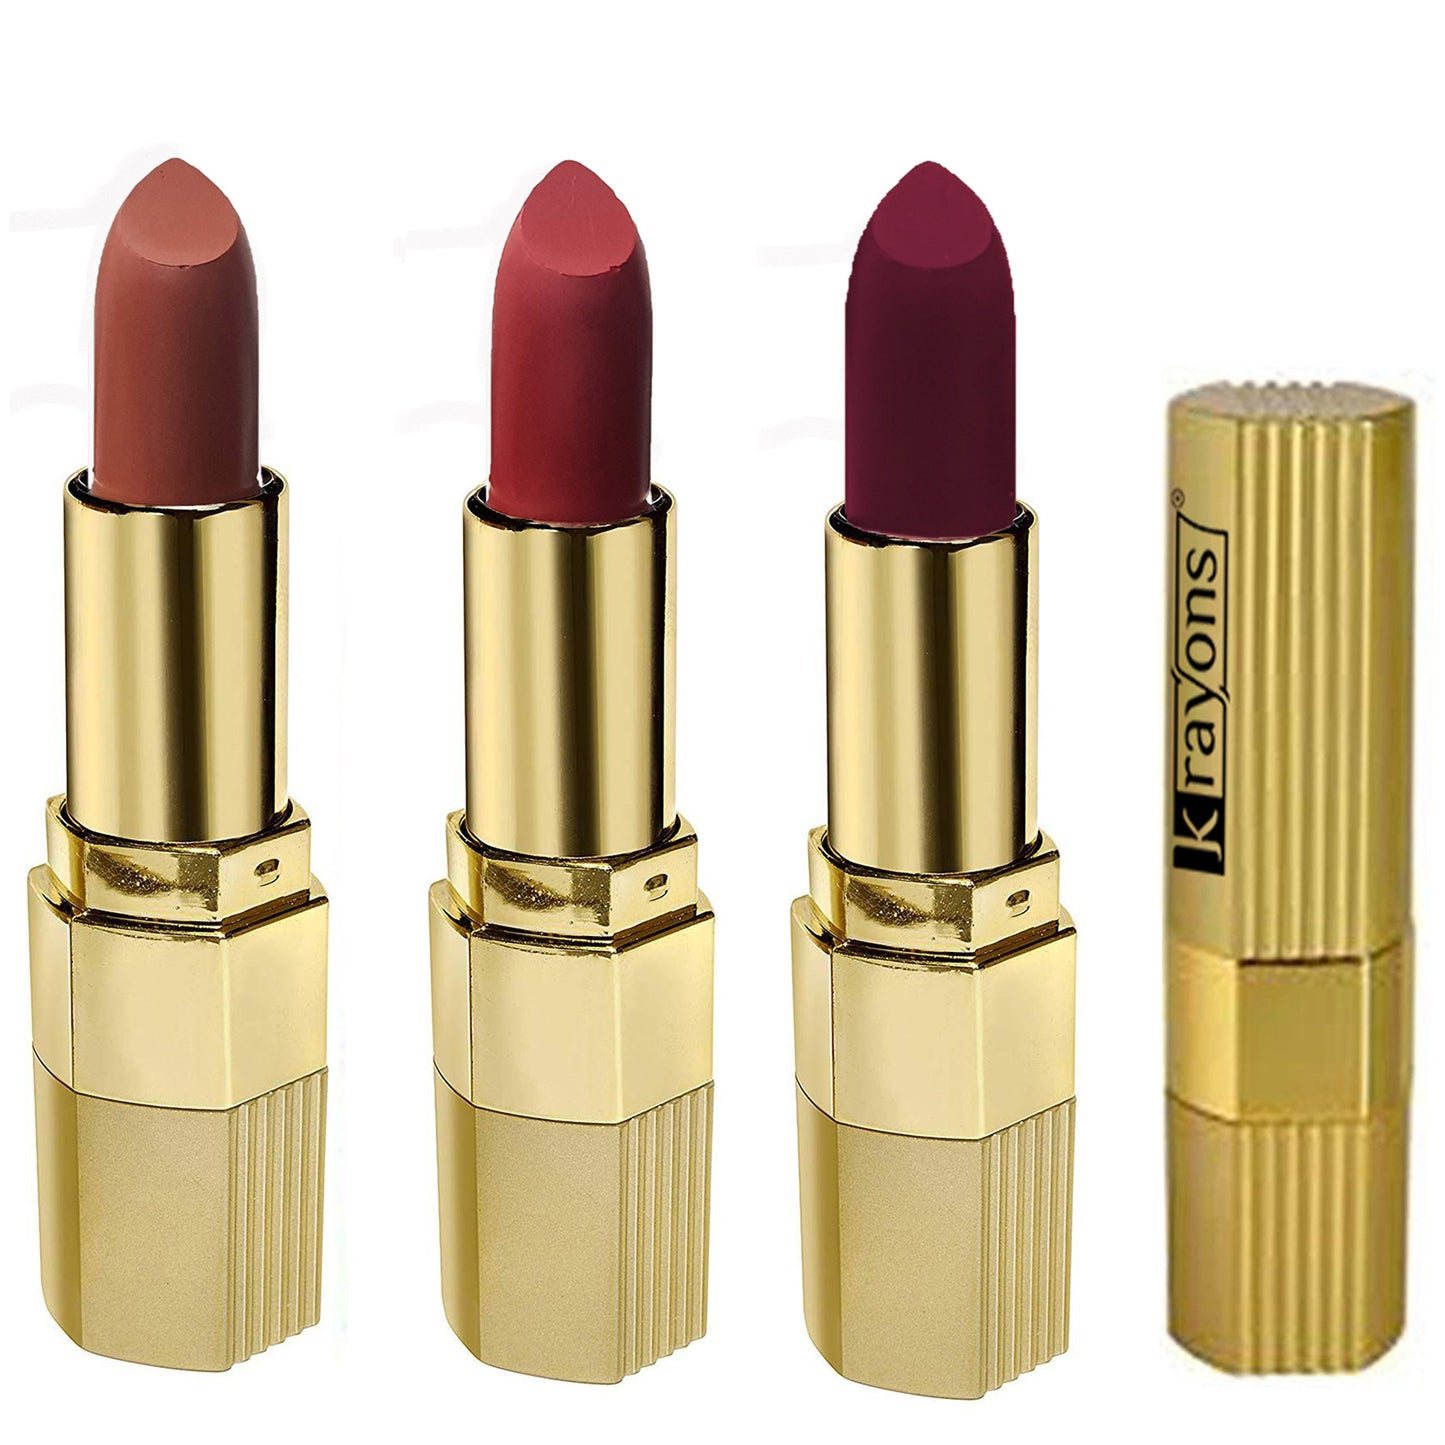 Krayons Desire Matte Lipstick, Highly Pigmented, Longlasting, 3.5g Each, Combo, Pack of 3 (Caramel Brown, Scarlet Red, Cherry Love)